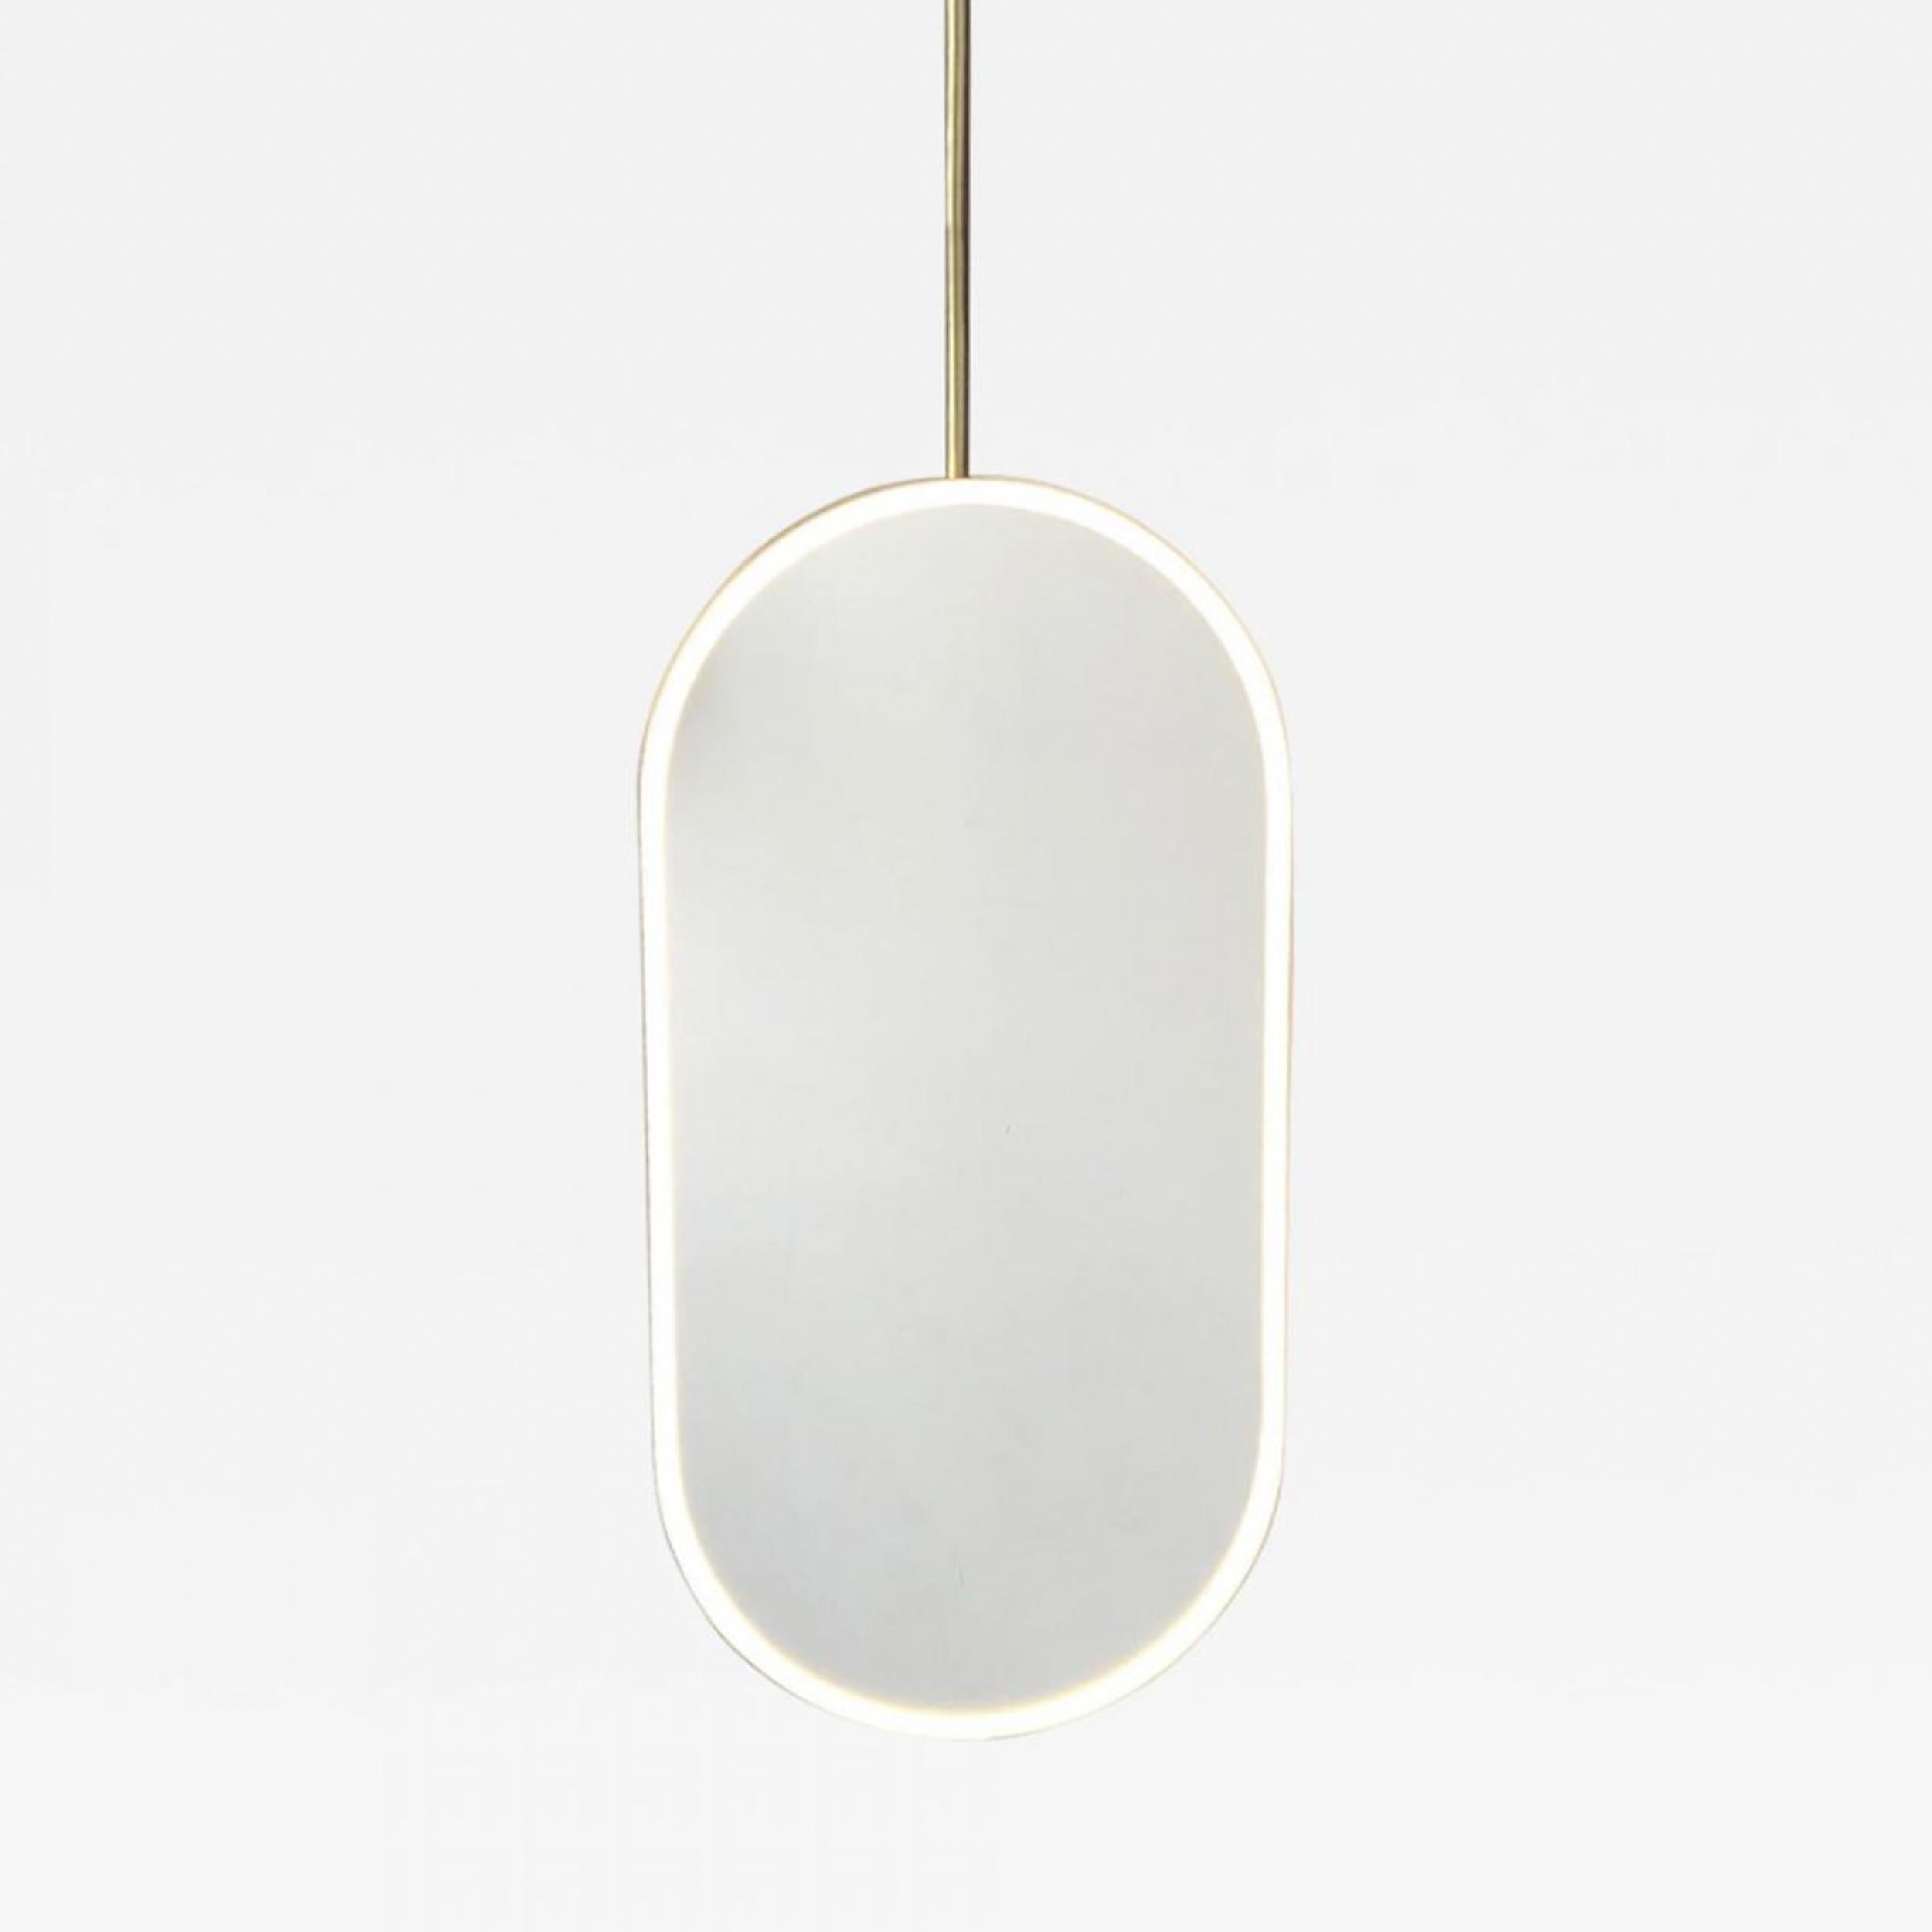 Modern front illuminated Capsula™ ceiling suspended pill shaped mirror with a minimalist brushed brass frame, arm and white powder coated panel backing (customisable).

Our unique collections of ceiling suspended mirrors are designed and handcrafted